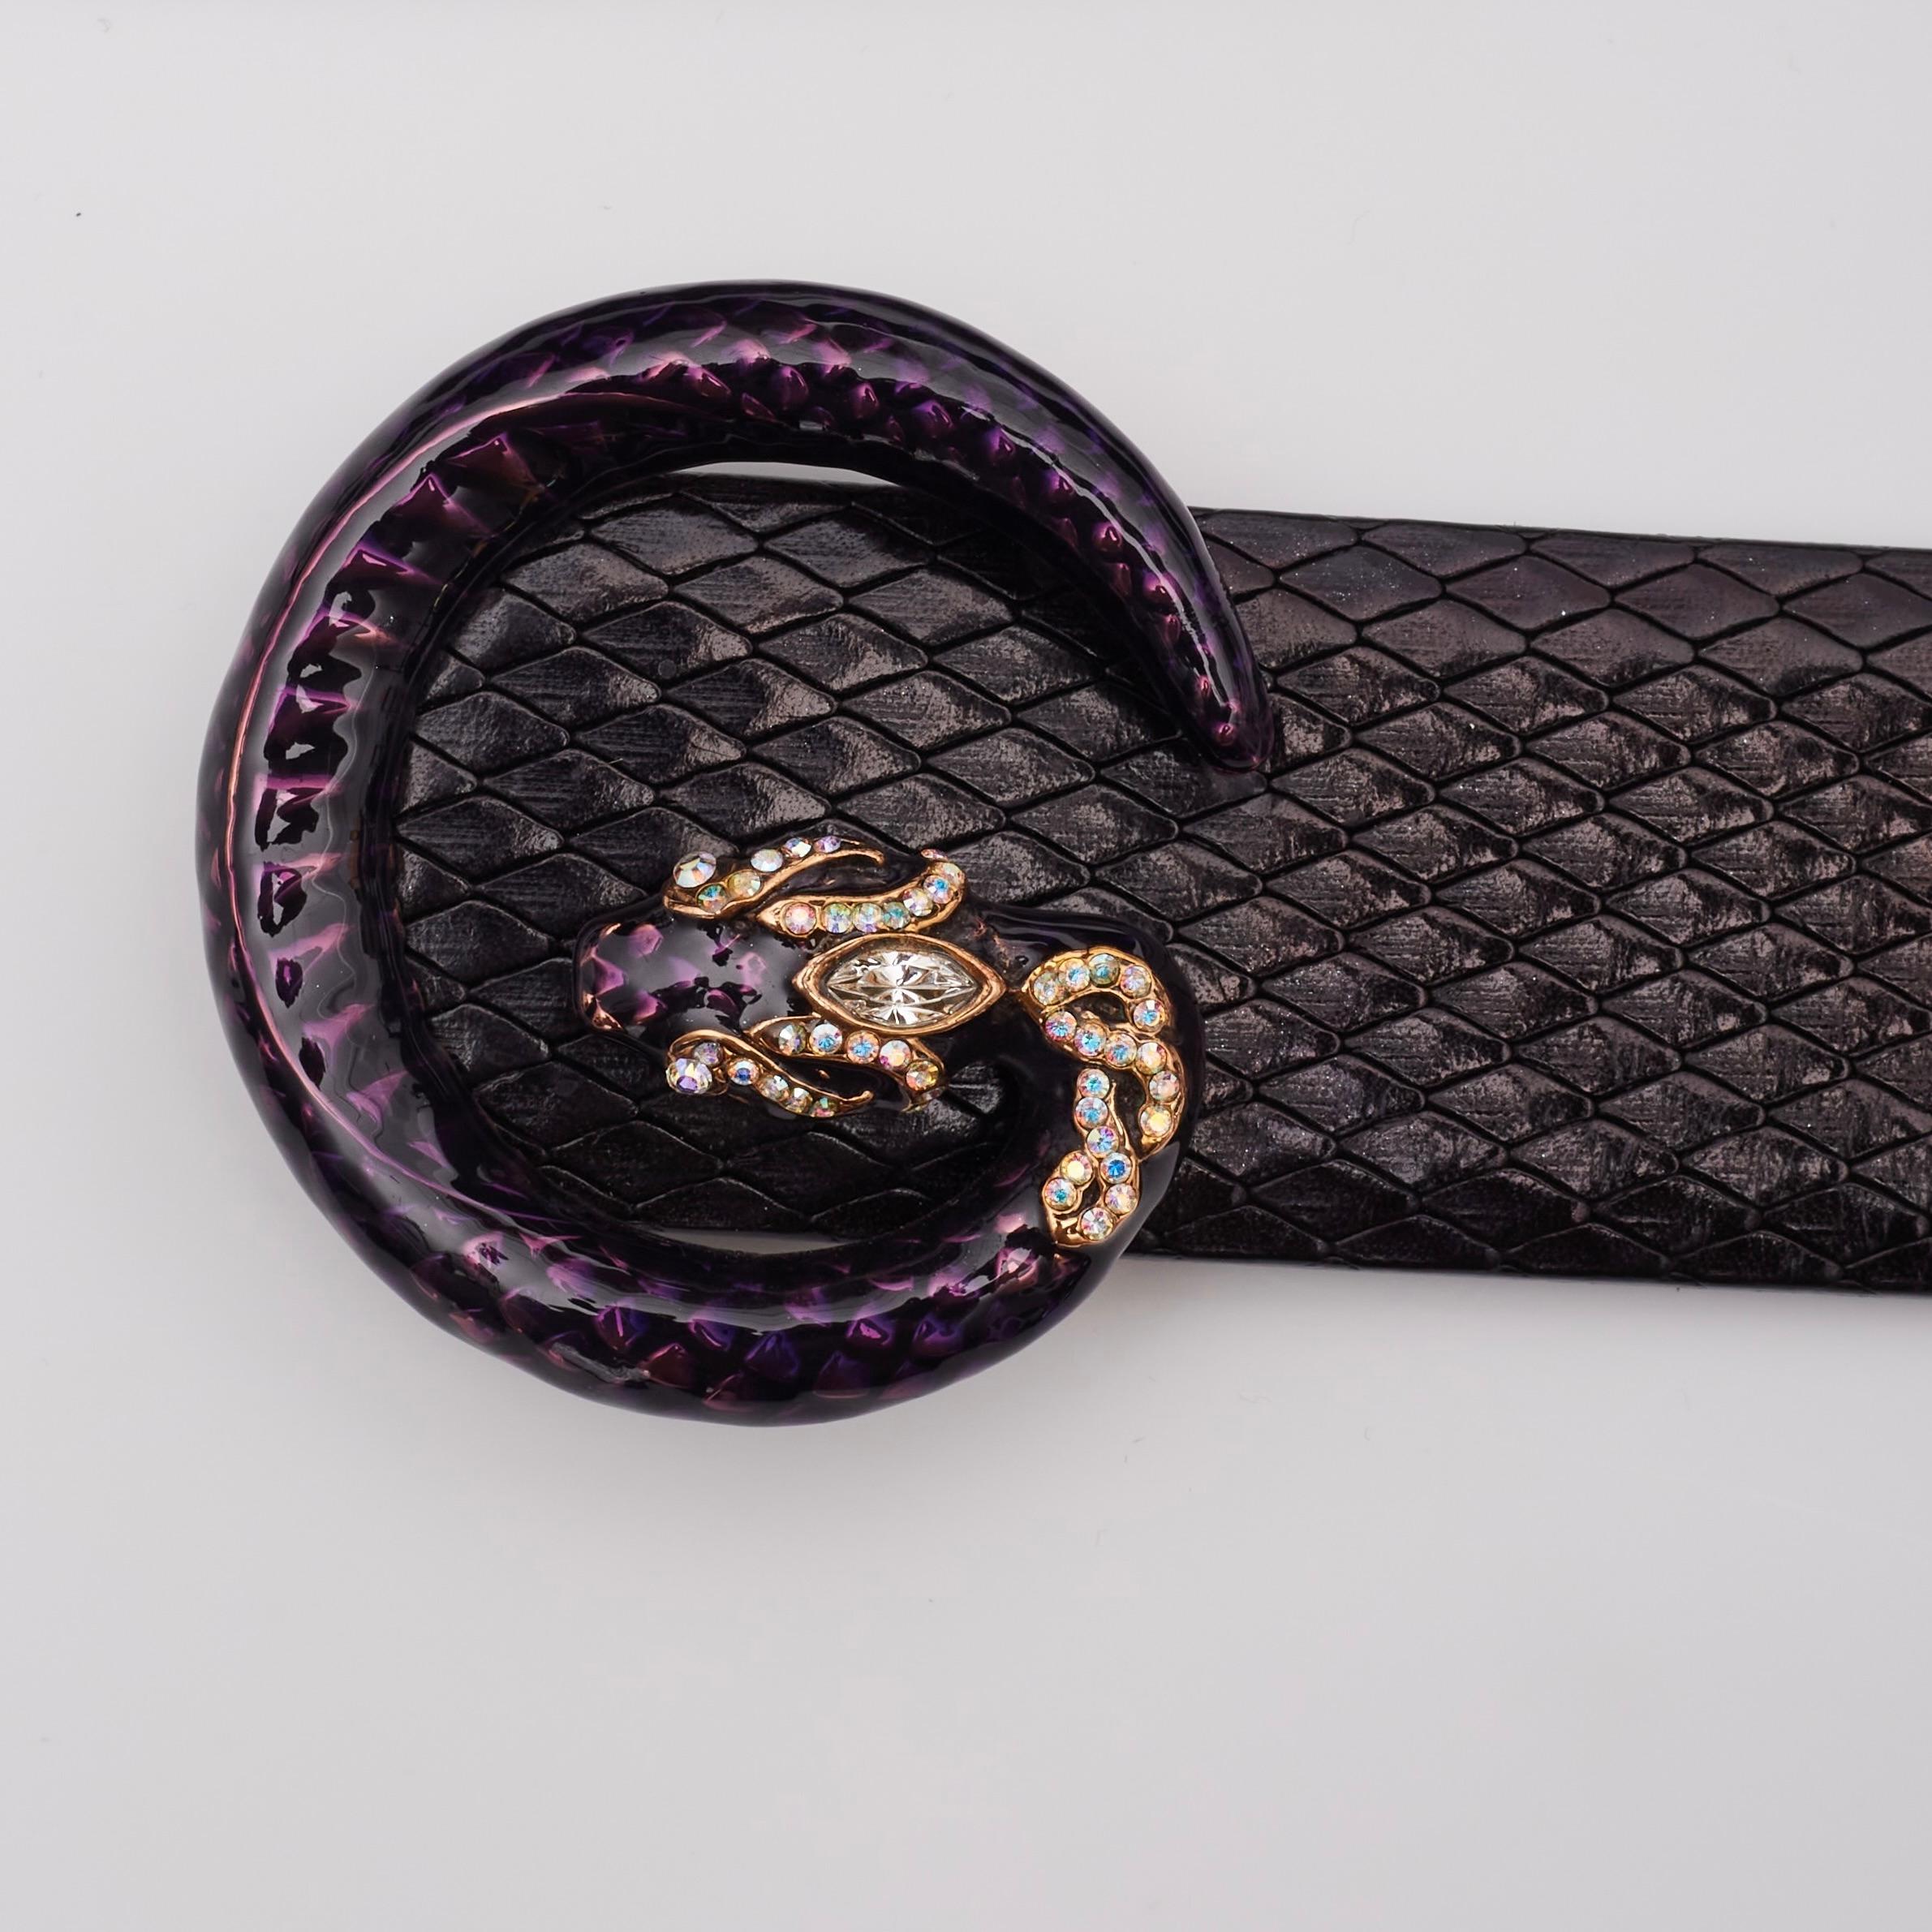 GUCCI TOM FORD PYTHON BLACK LEATHER PURPLE G LOGO SNAKE BELT (85/34)

Color: Black with purple snake logo buckle
Vintage 1990s
Material: Python leather
Model No: 129191
Measures: L 36” x W 1.75”
Size: 85 cm / 34 inch
Comes with: No Brand dust